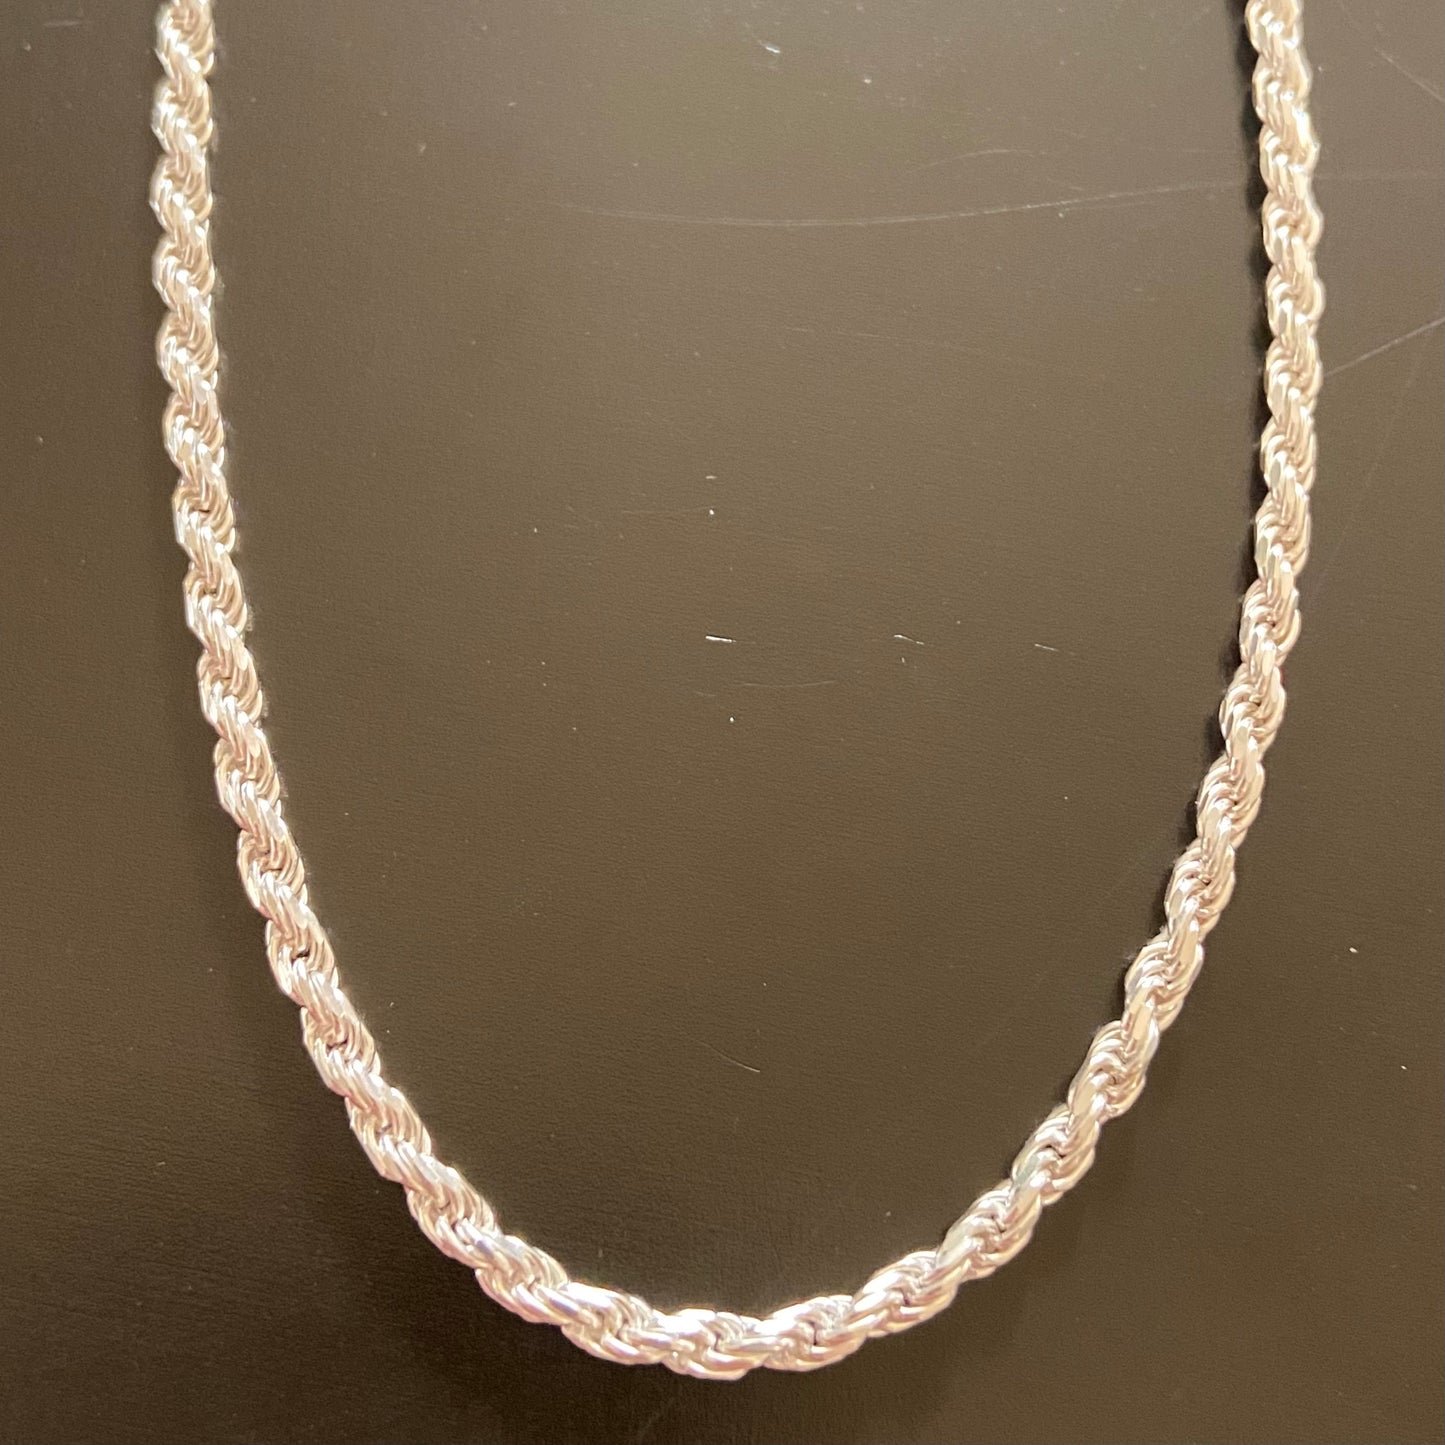 Solid Silver Rope Chain 20in 3mm